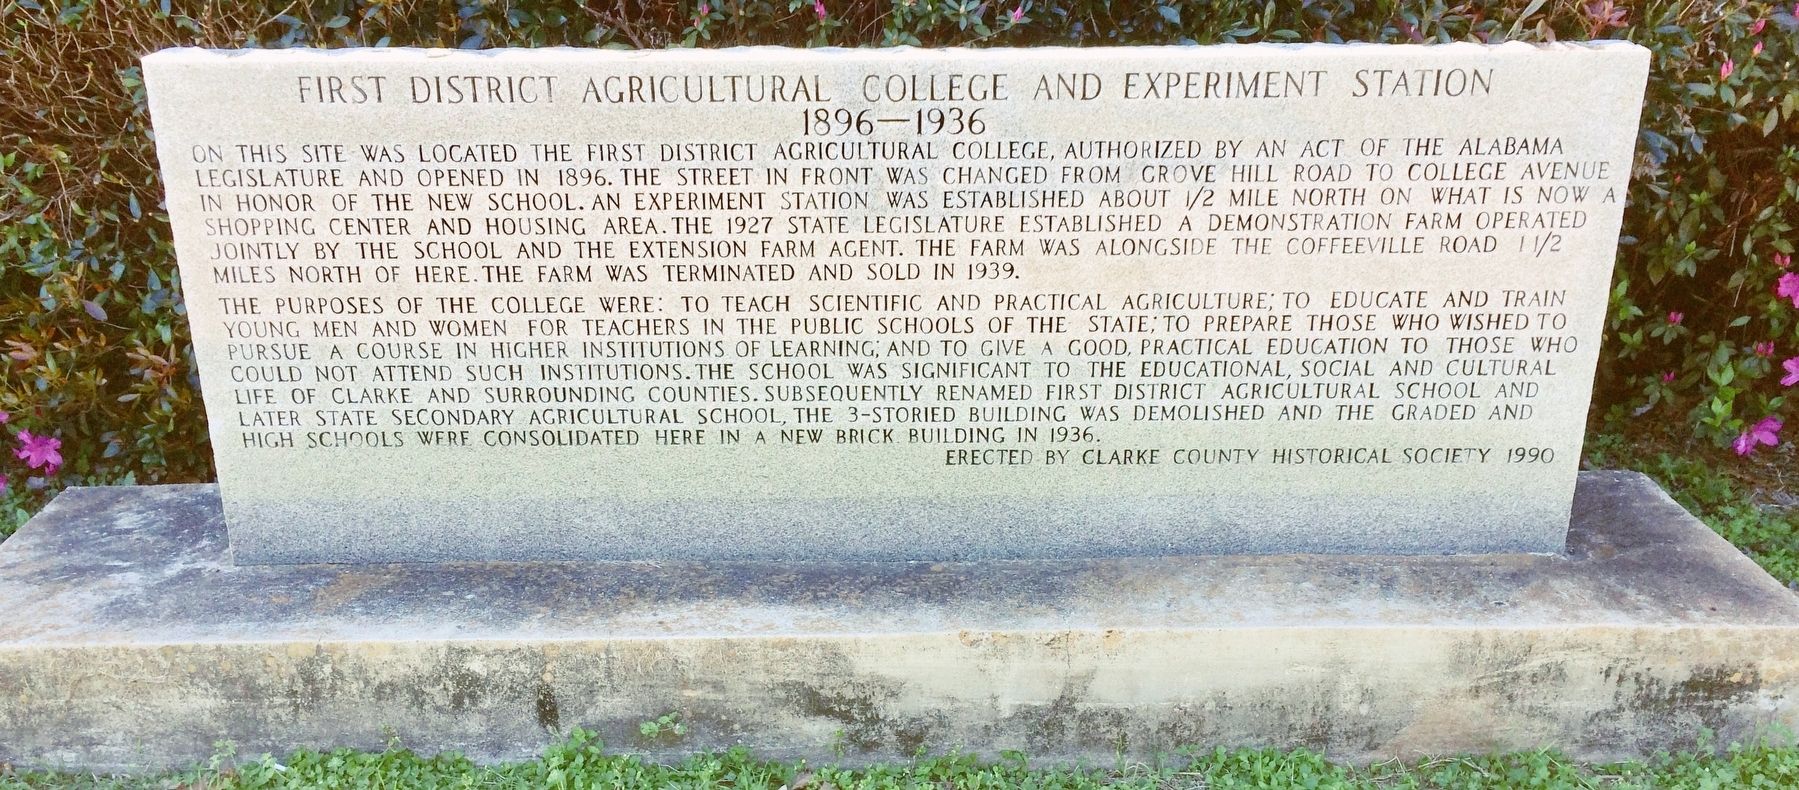 First District Agricultural College and Experiment Station Marker image. Click for full size.